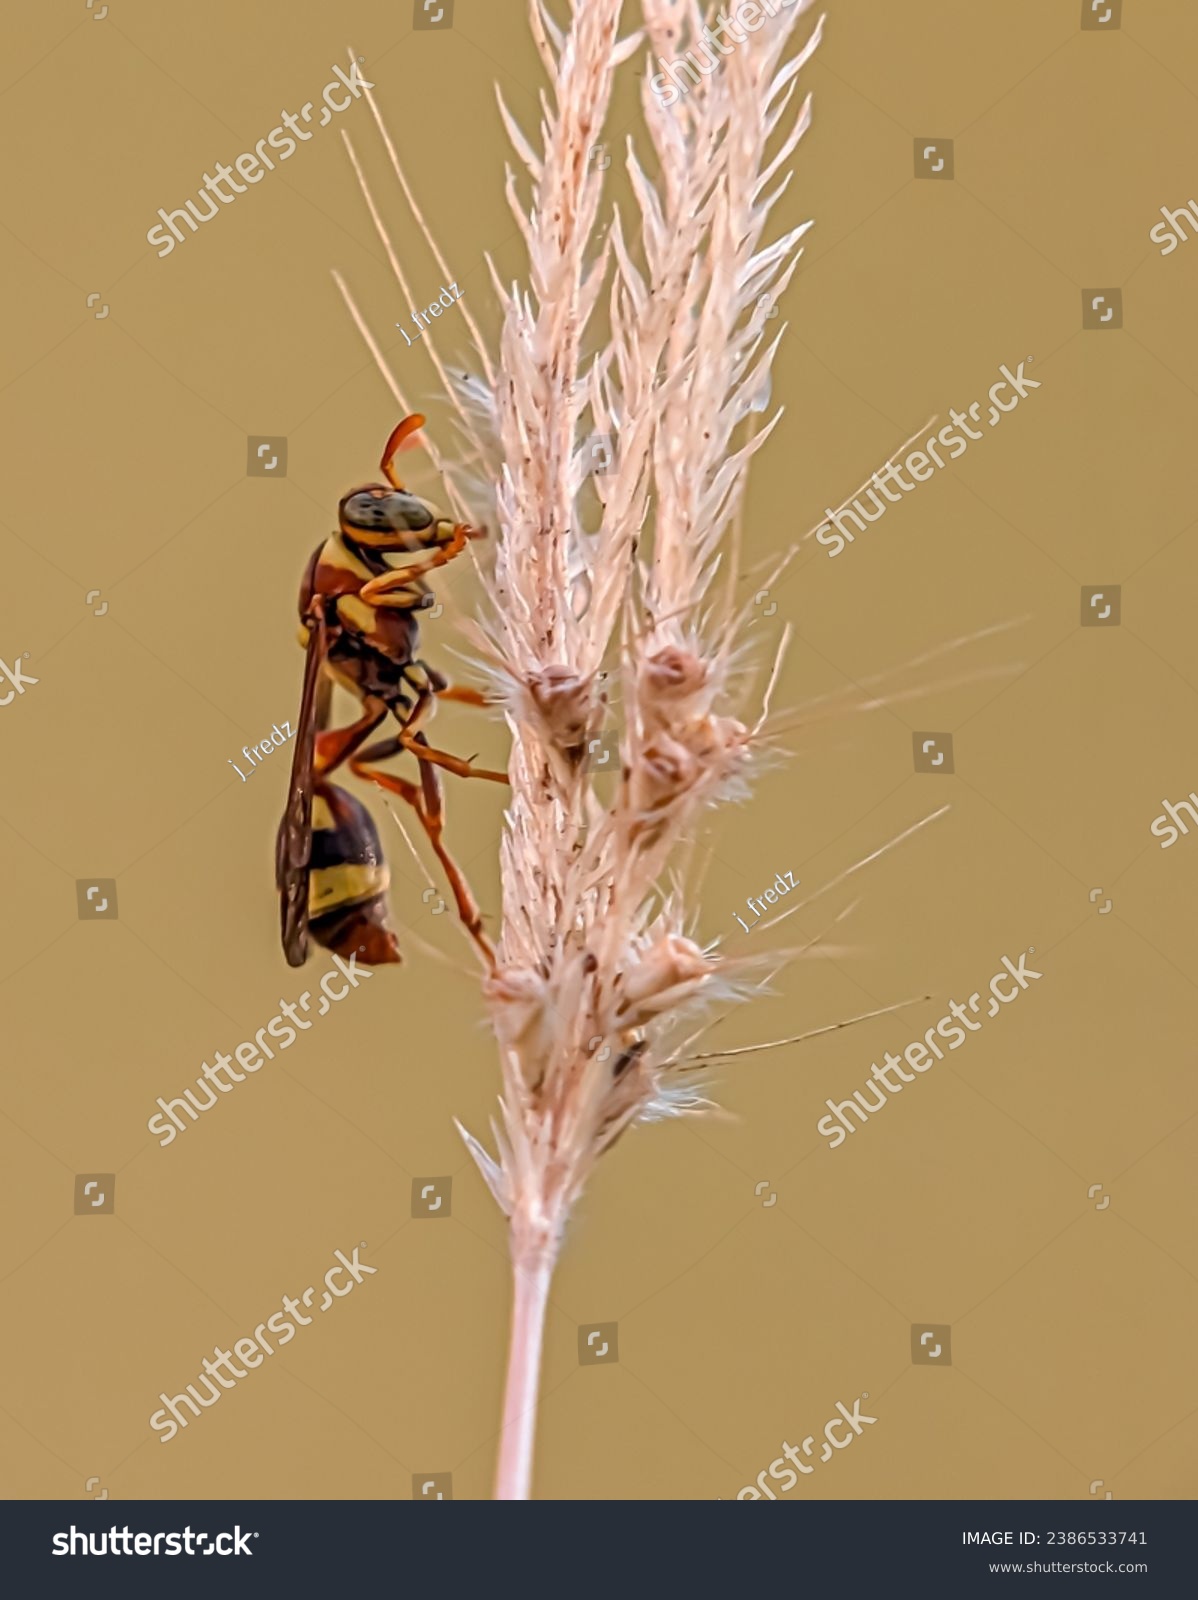 Wasp, any member of a group of insects in the order Hymenoptera, suborder Apocrita, some of which are stinging. The paper wasp appears to be perched on the grass with a gradient background  #2386533741